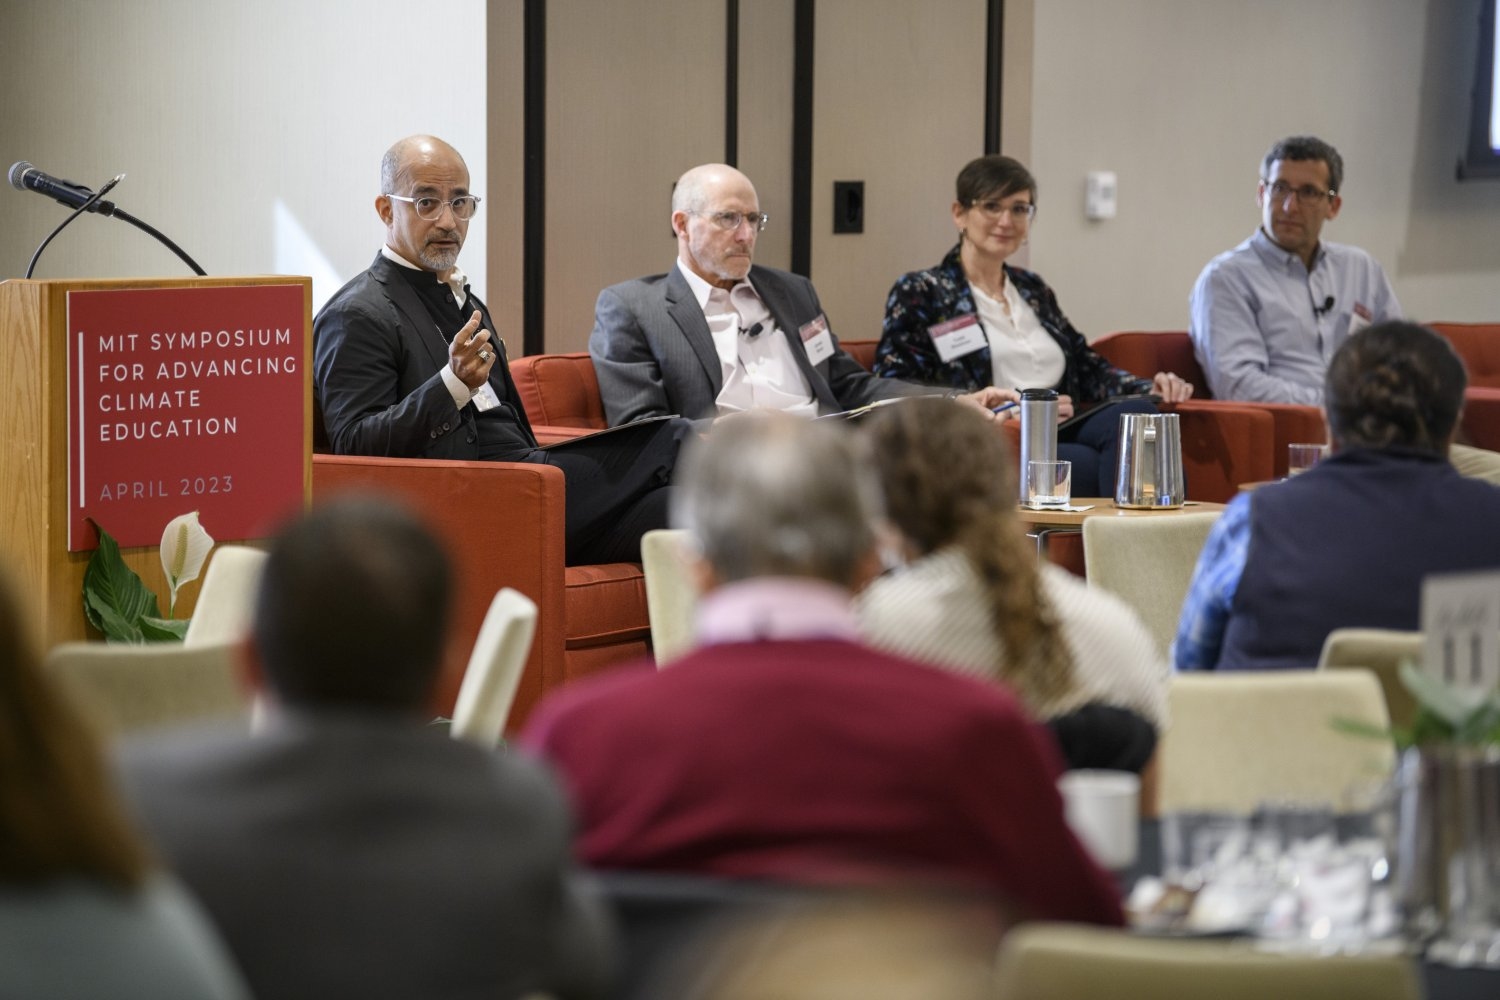 Panel discussion on structural change in higher education, moderated by MIT’s John Fernández (left), with leaders from Harvard, Duke, and Brown universities.